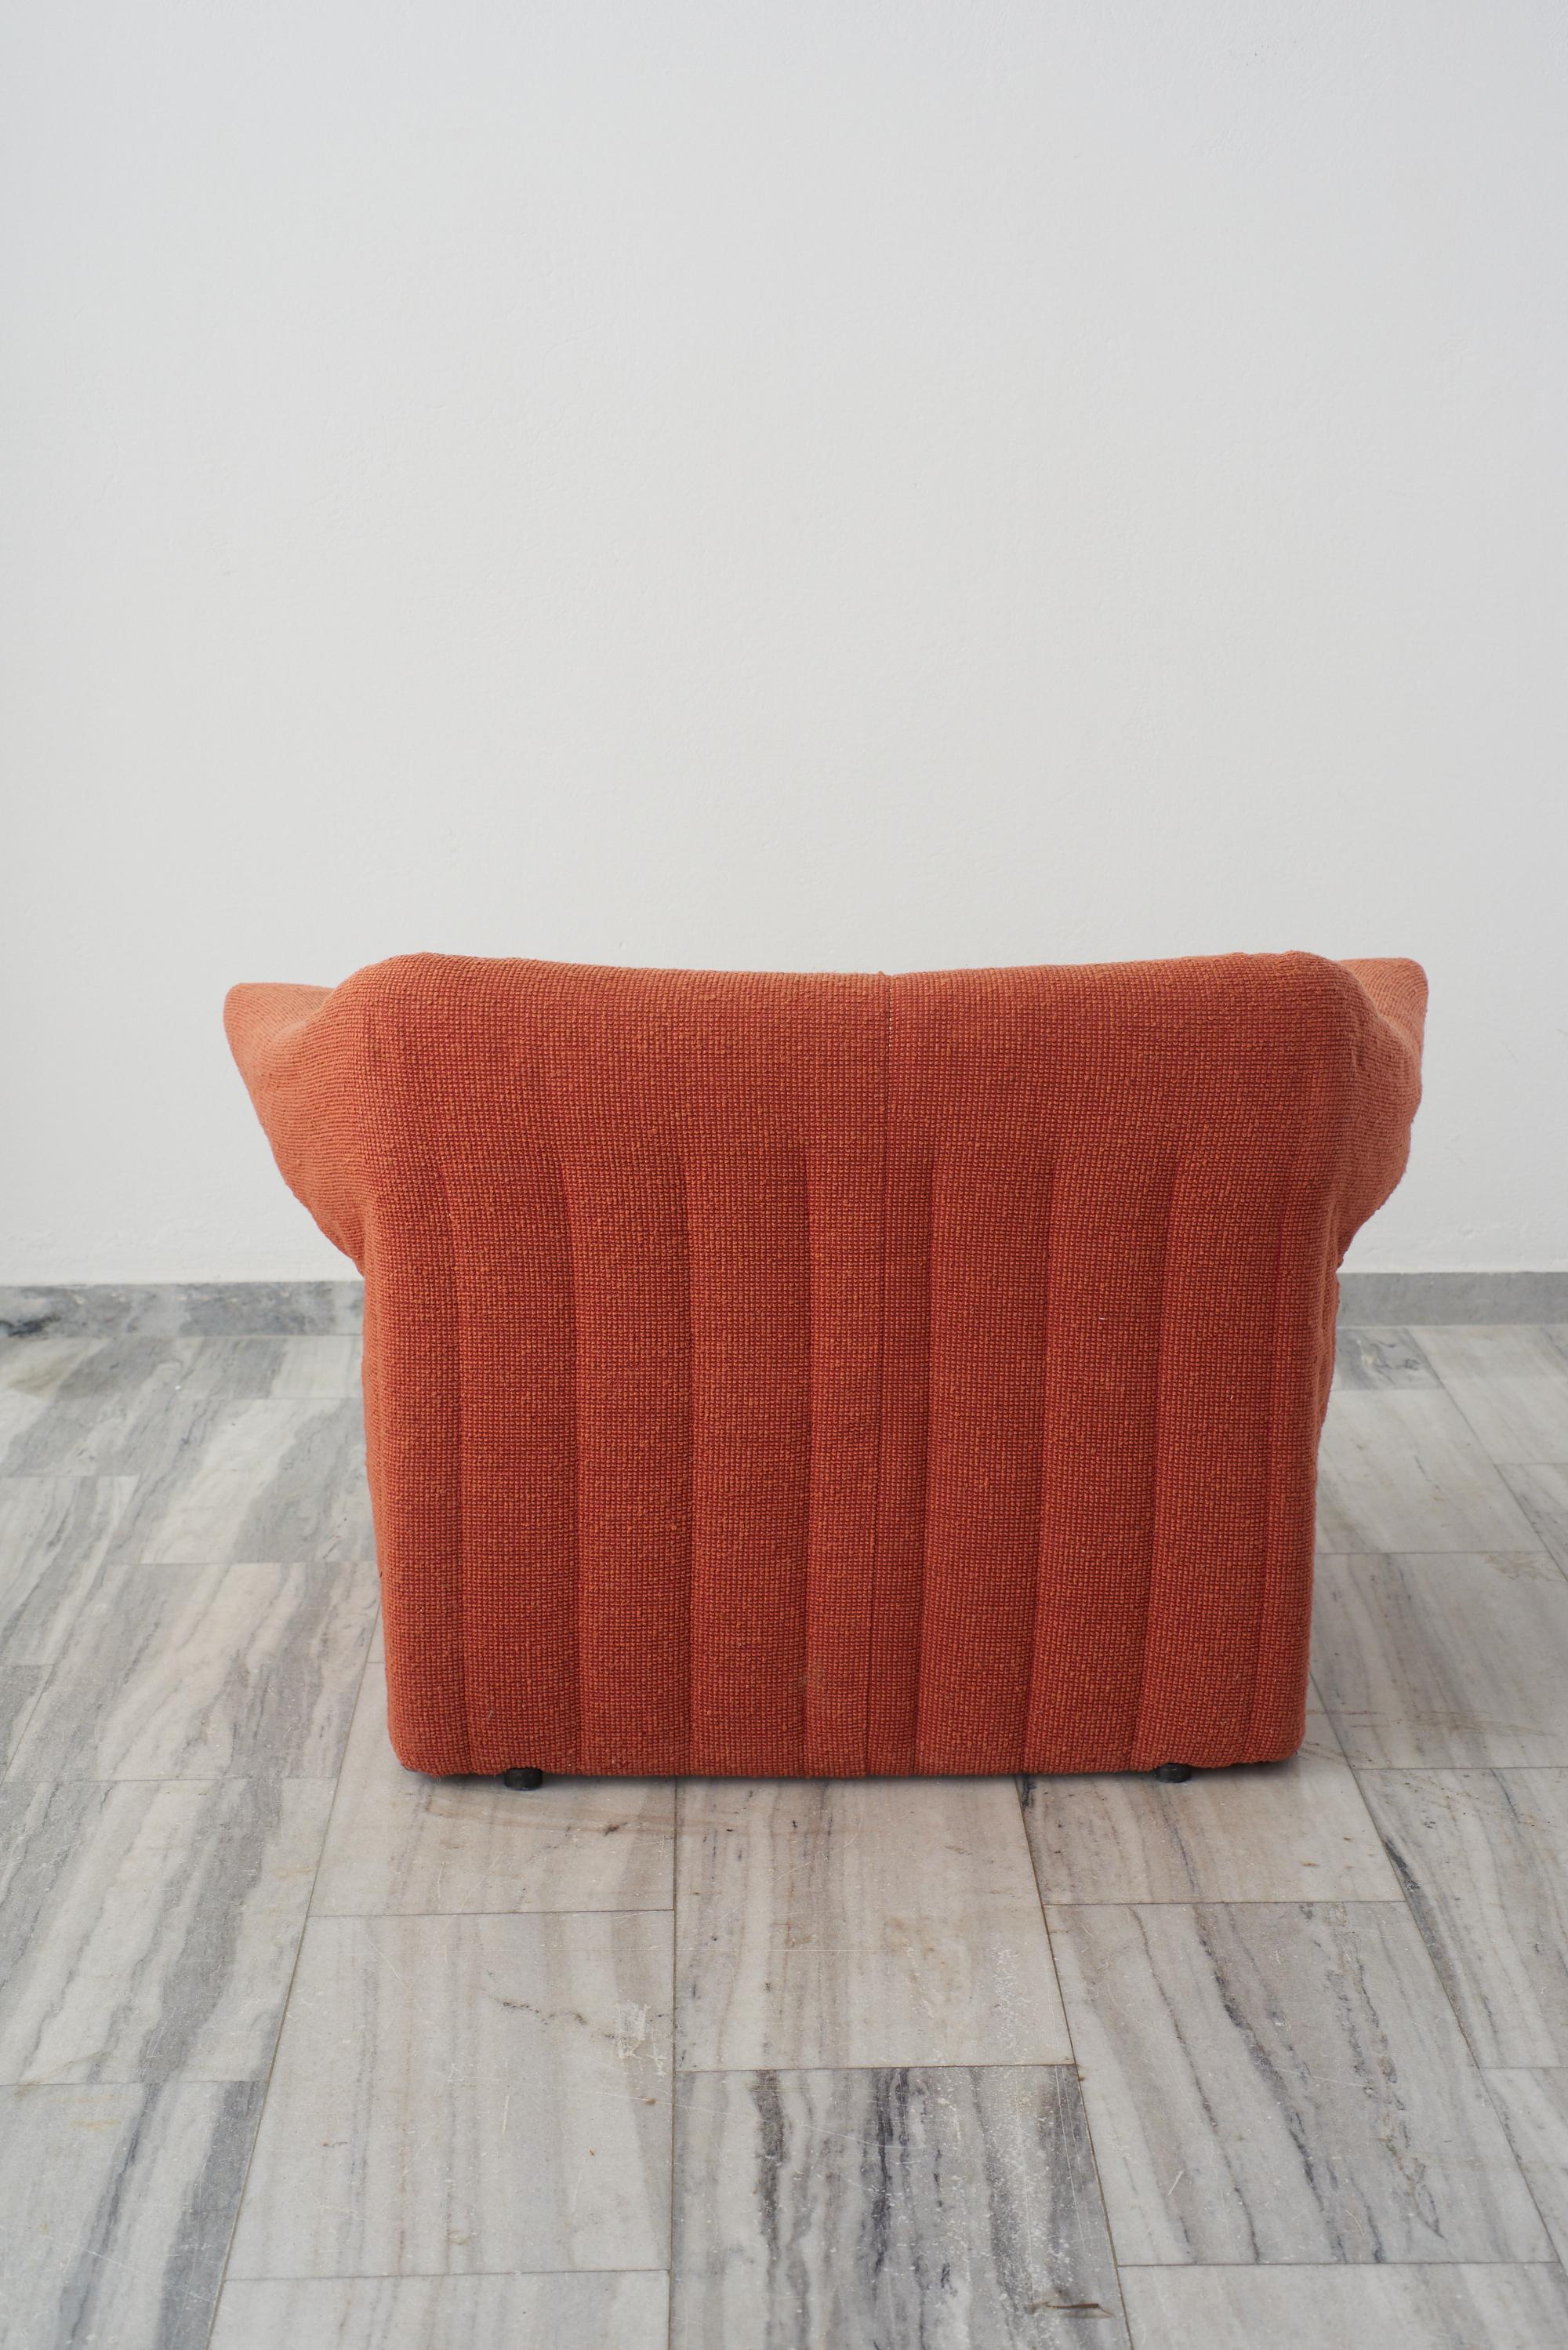 Late 20th Century Le Stelle armchair by Mario Bellini for B&B Italia, 1974. For Sale